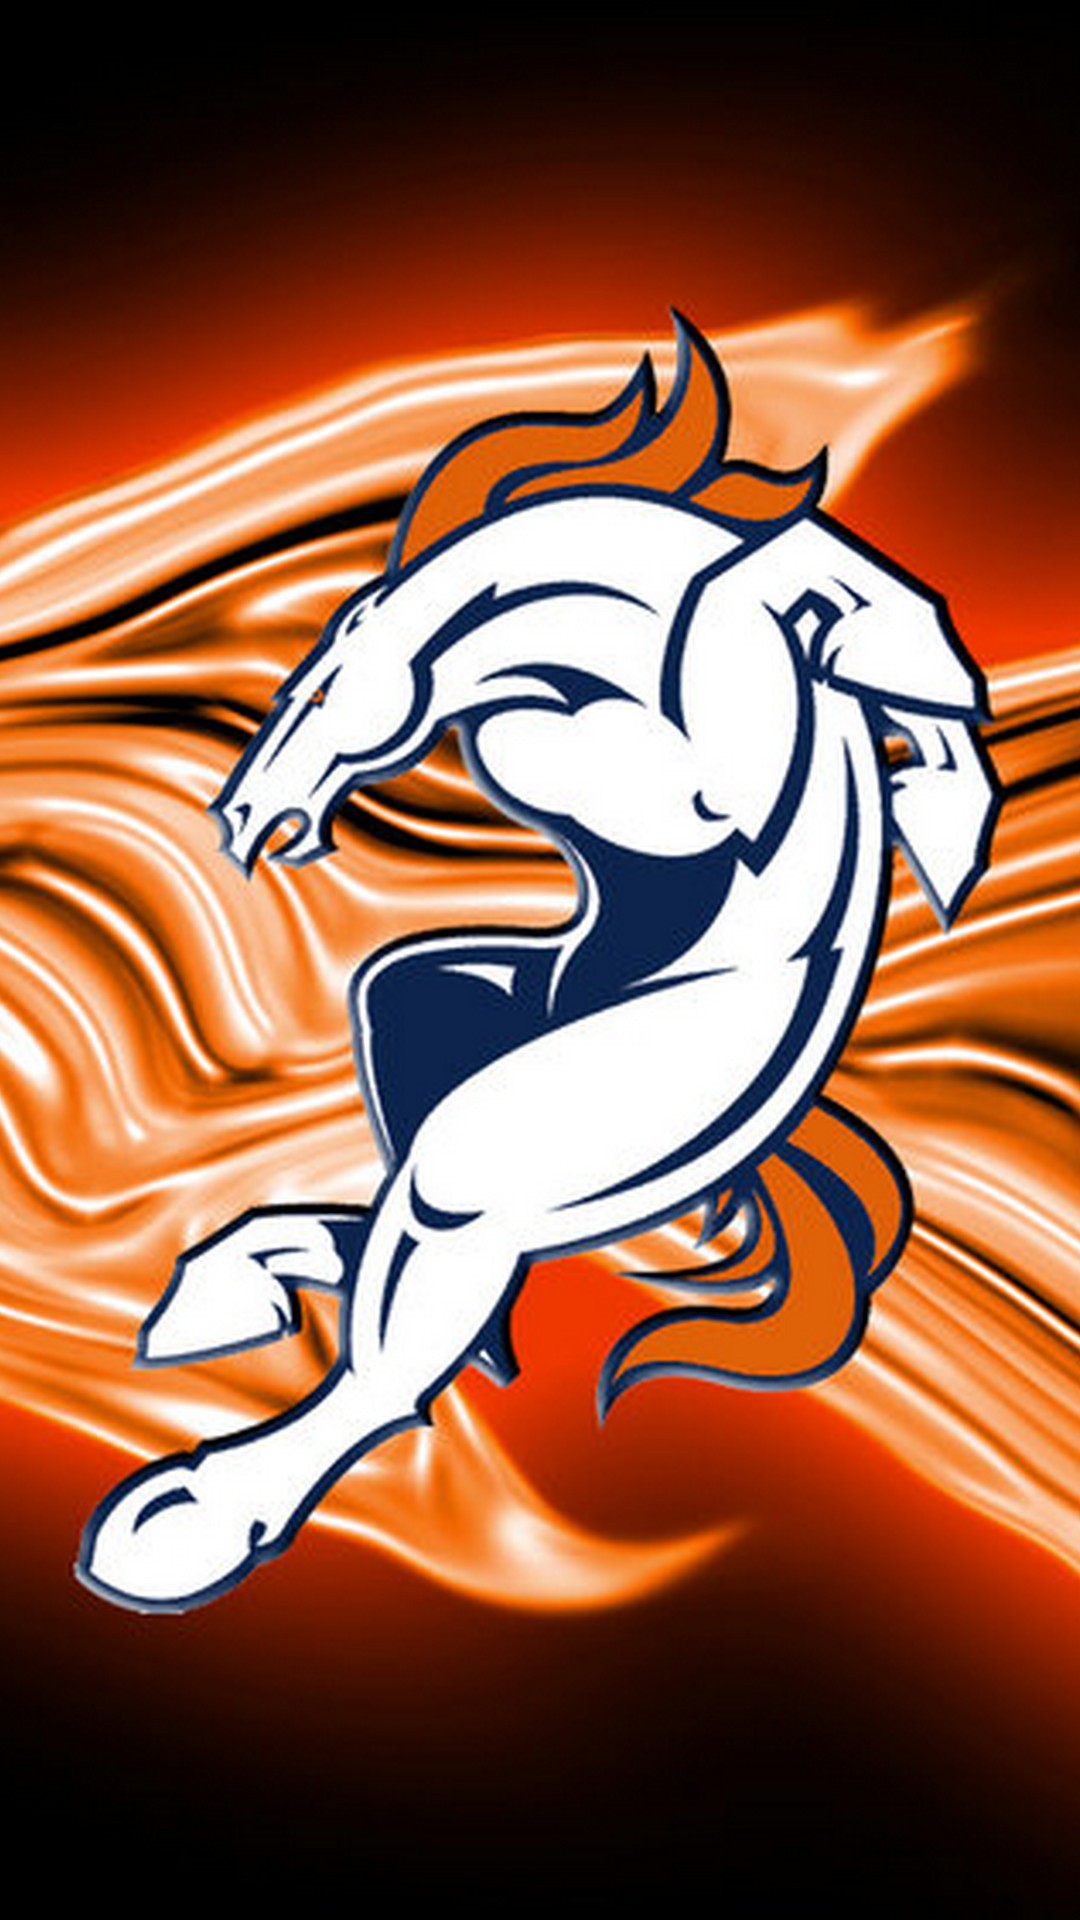 Denver Broncos iPhone X Wallpaper with high-resolution 1080x1920 pixel. Download and set as wallpaper for Apple iPhone X, XS Max, XR, 8, 7, 6, SE, iPad, Android